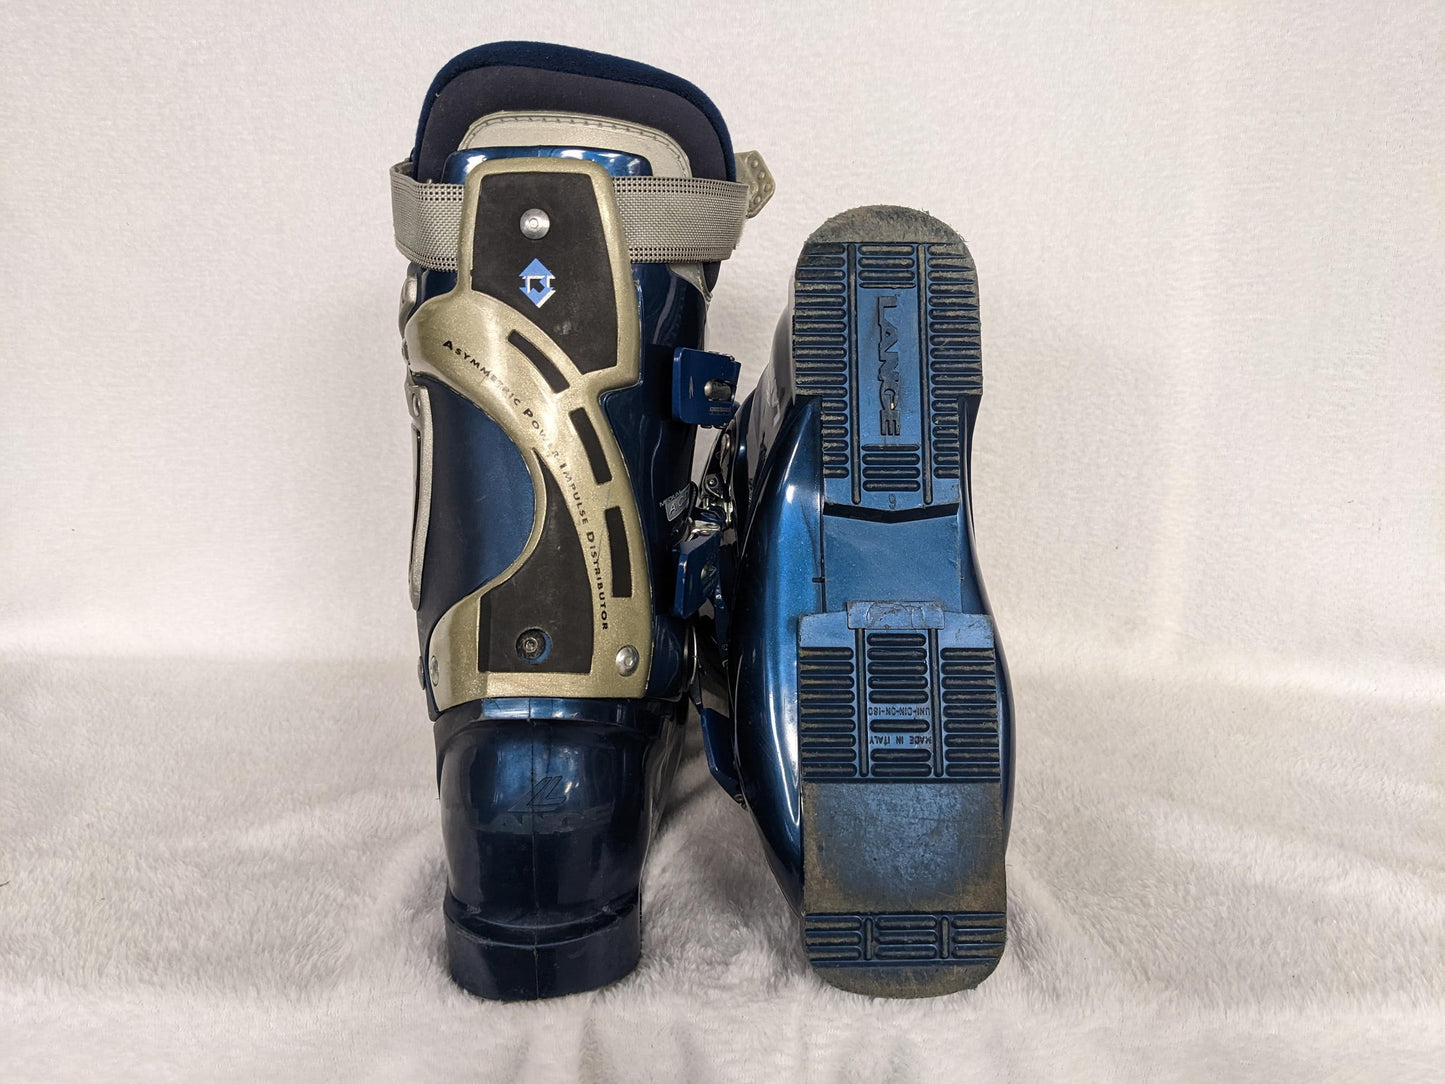 Lange GX7 Ski Boots Size 24.5 Color Blue Condition Used